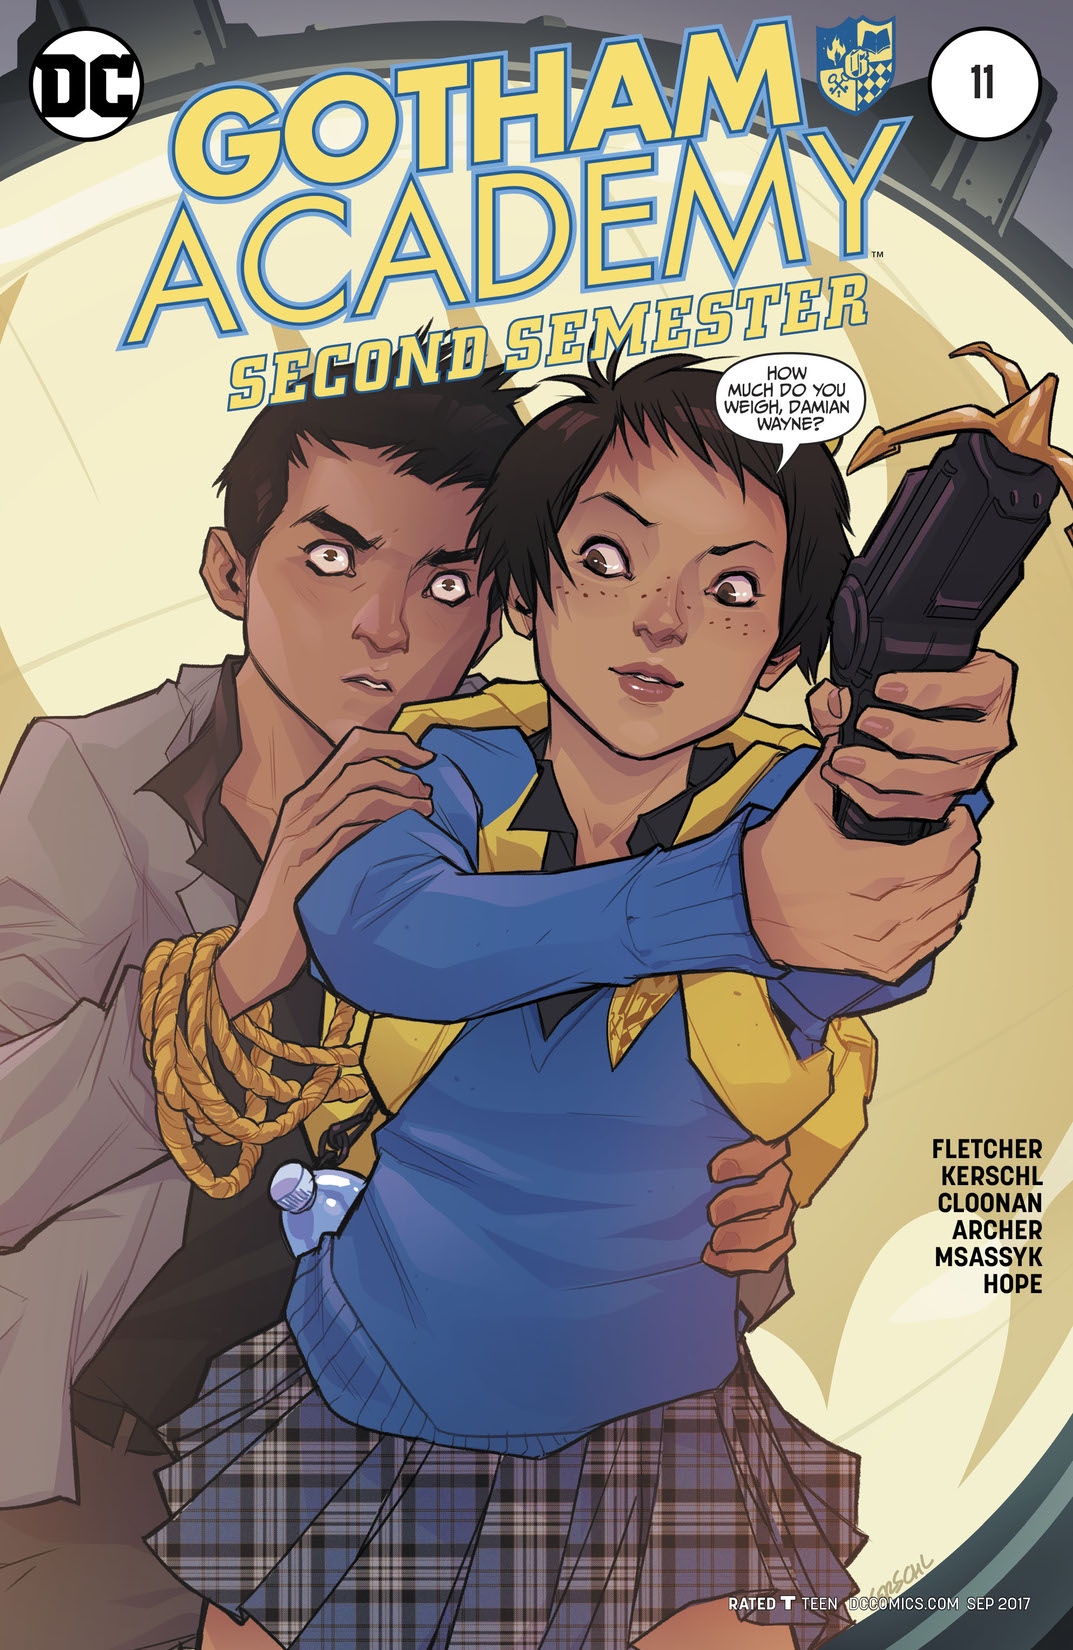 Gotham Academy: Second Semester #11 preview images